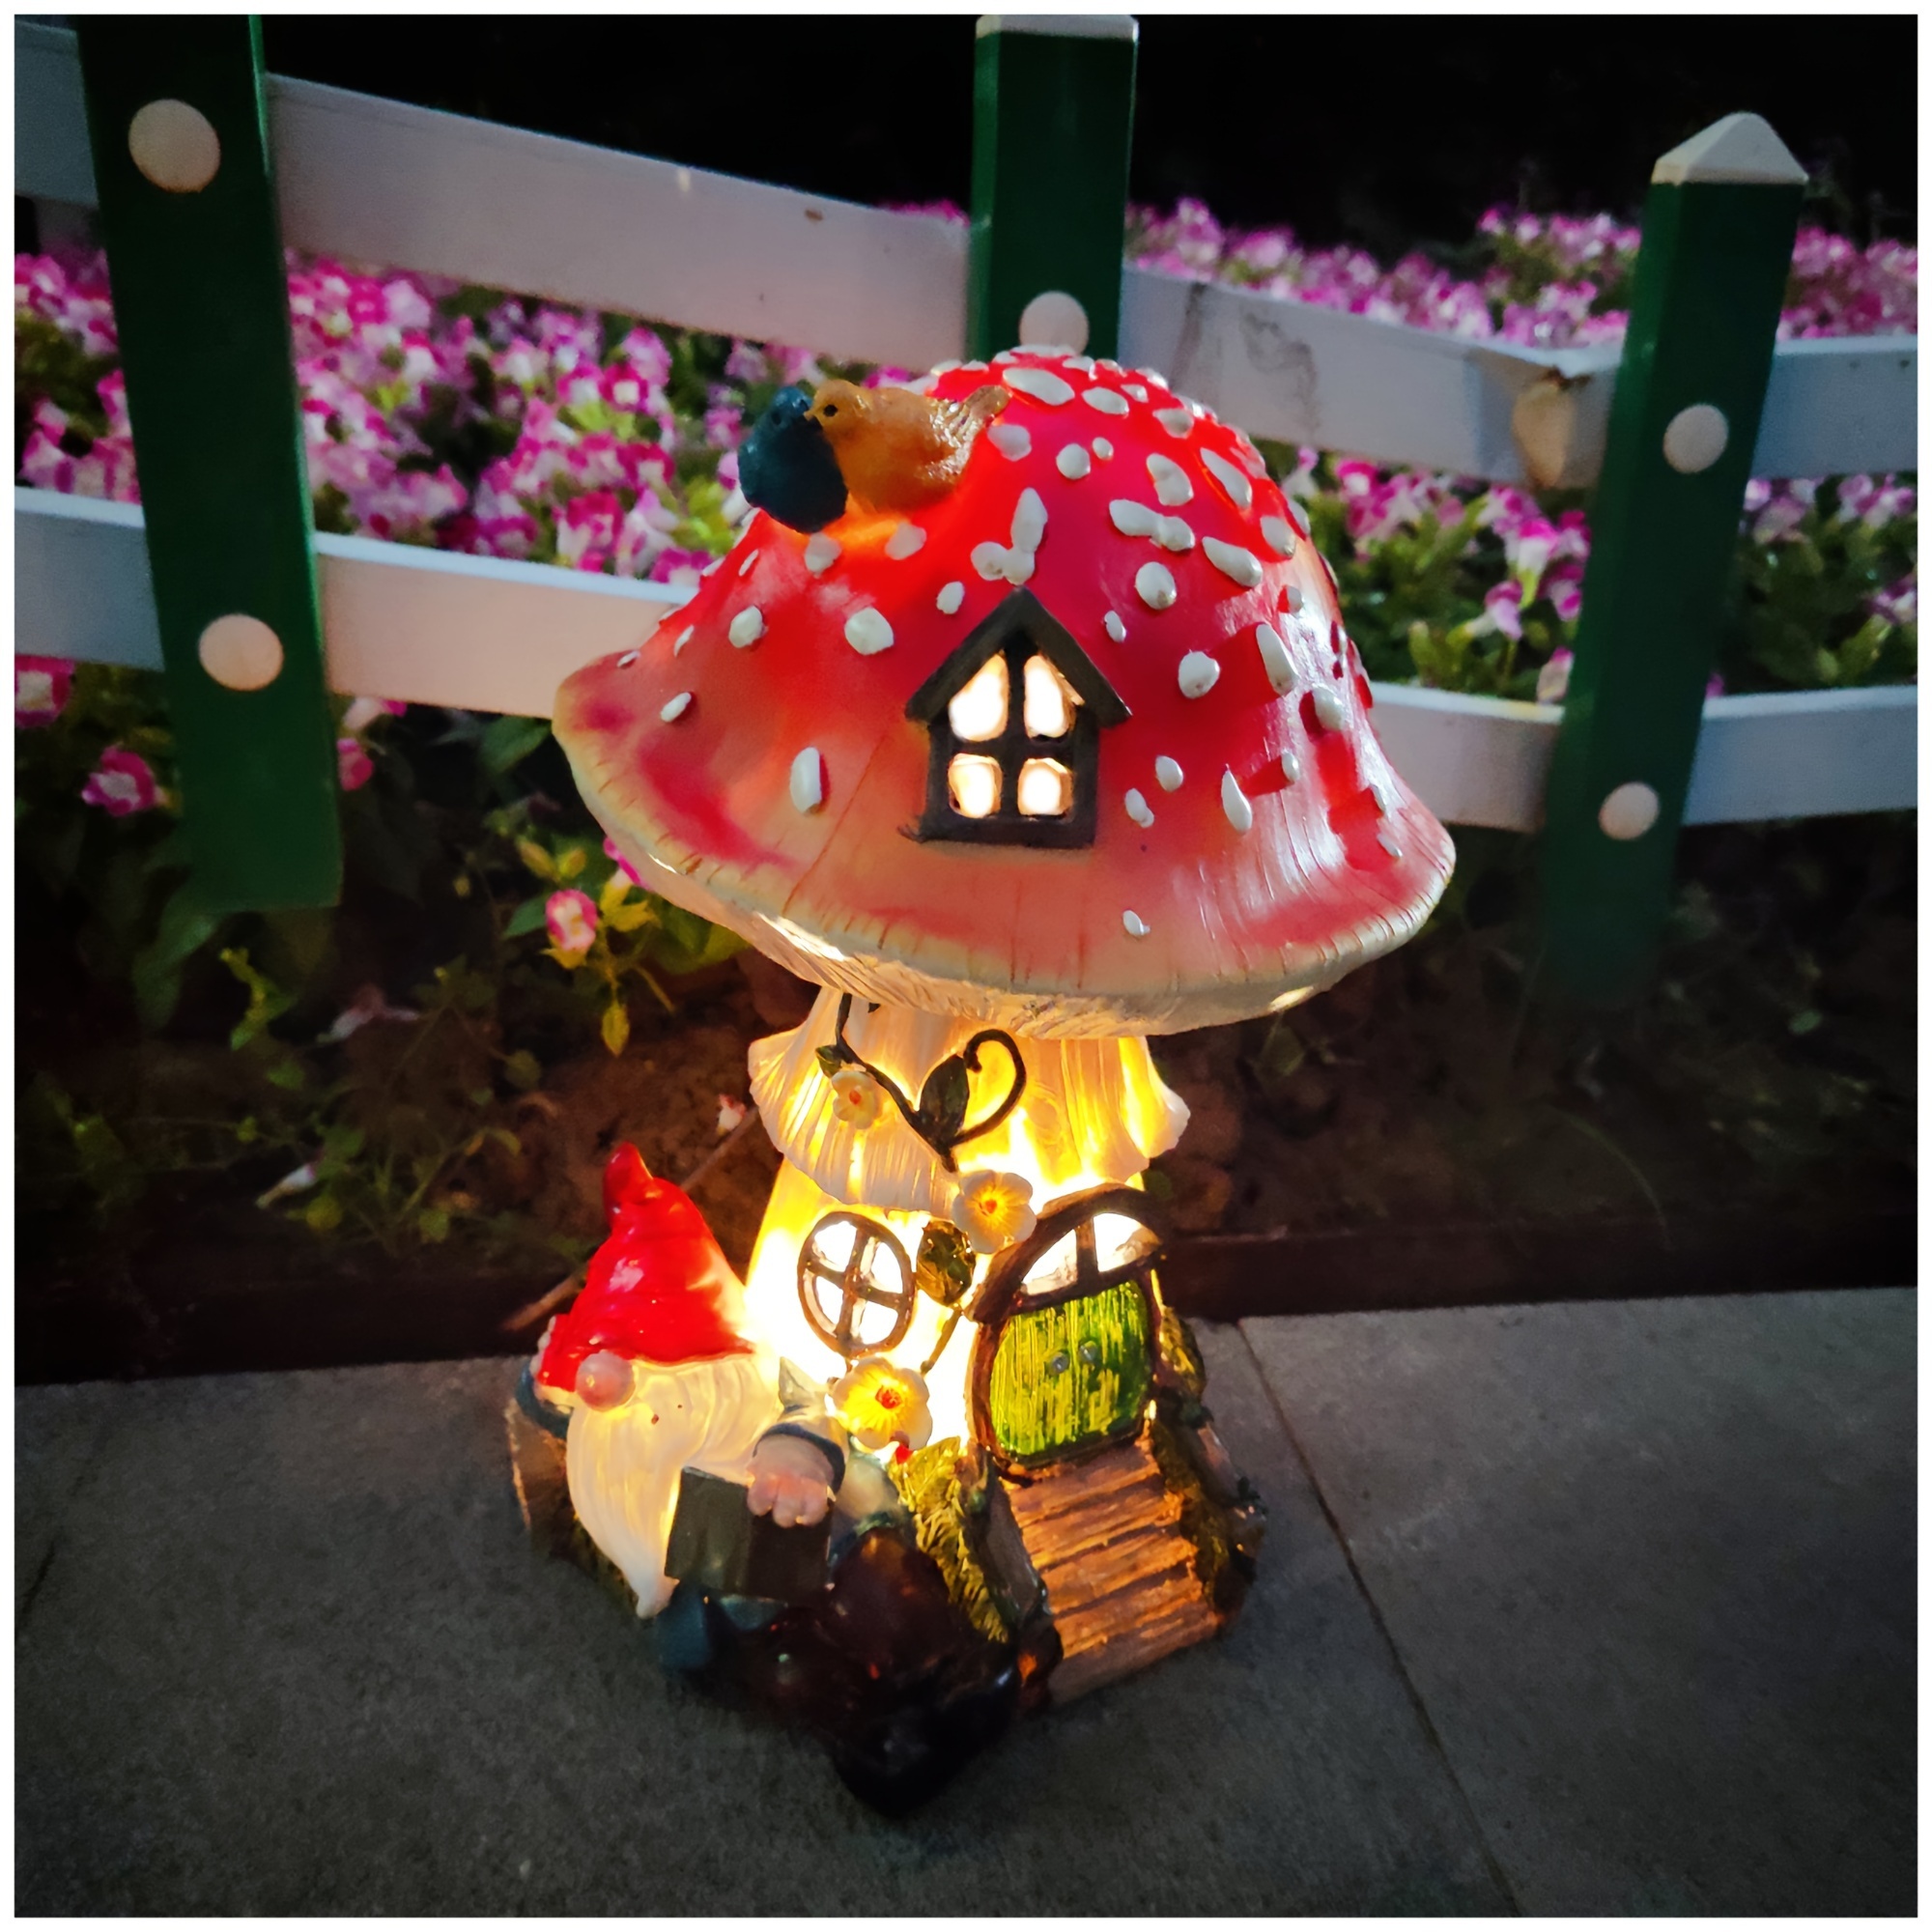 

11" Tall Solar Mushroom Fairy House With Sleeping Gnome Outdoor Statues With Lamp - Weather Proof Lawn Garden Decor Gnome Statue For Patio, Balcony, Yard, Outdoor Ornament For Enchanting Gardens